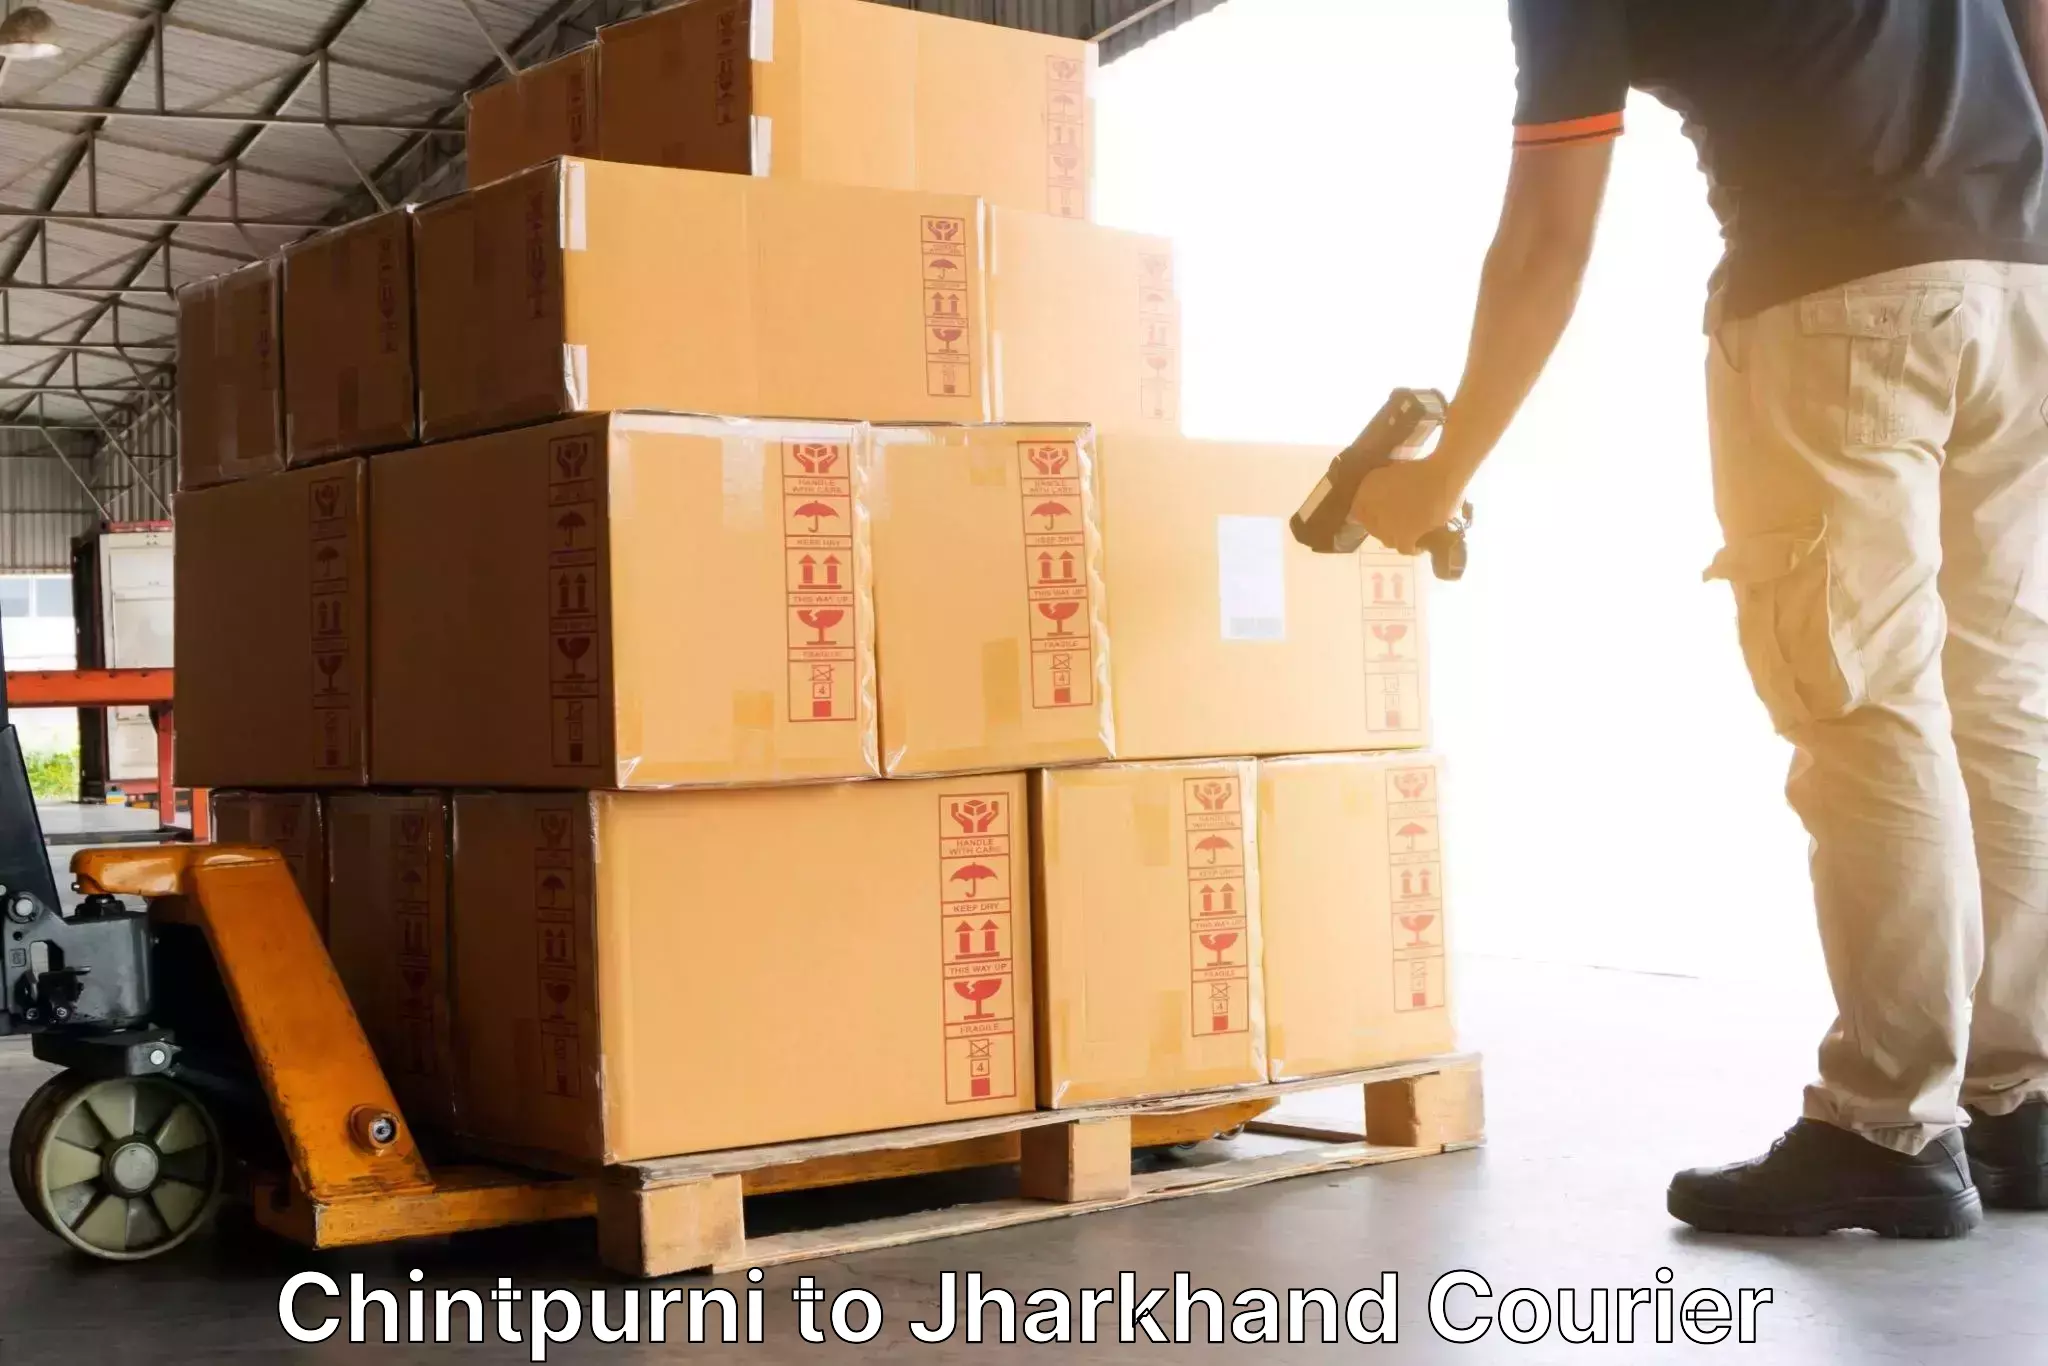 On-call courier service Chintpurni to Dumka